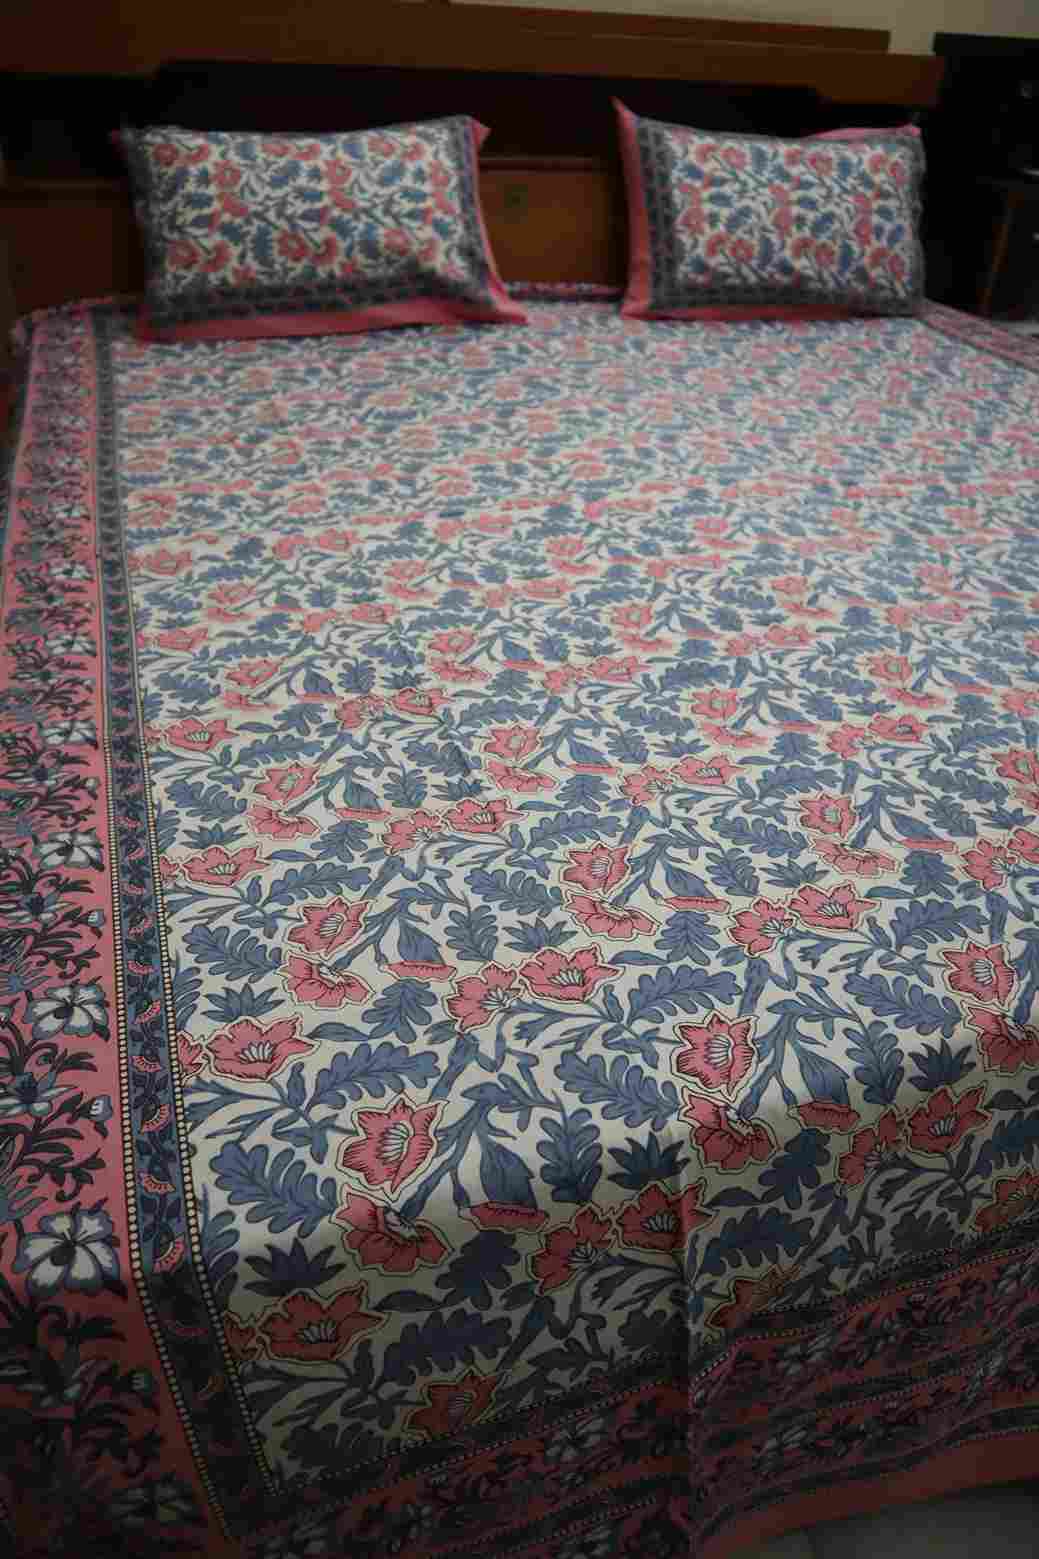 Pink & Grey Floral Pure Cotton Jaipuri Bedsheets for Double Bed with Pillow Covers, 90" x 108" King Size, 180 TC, Breathable and Skin Friendly